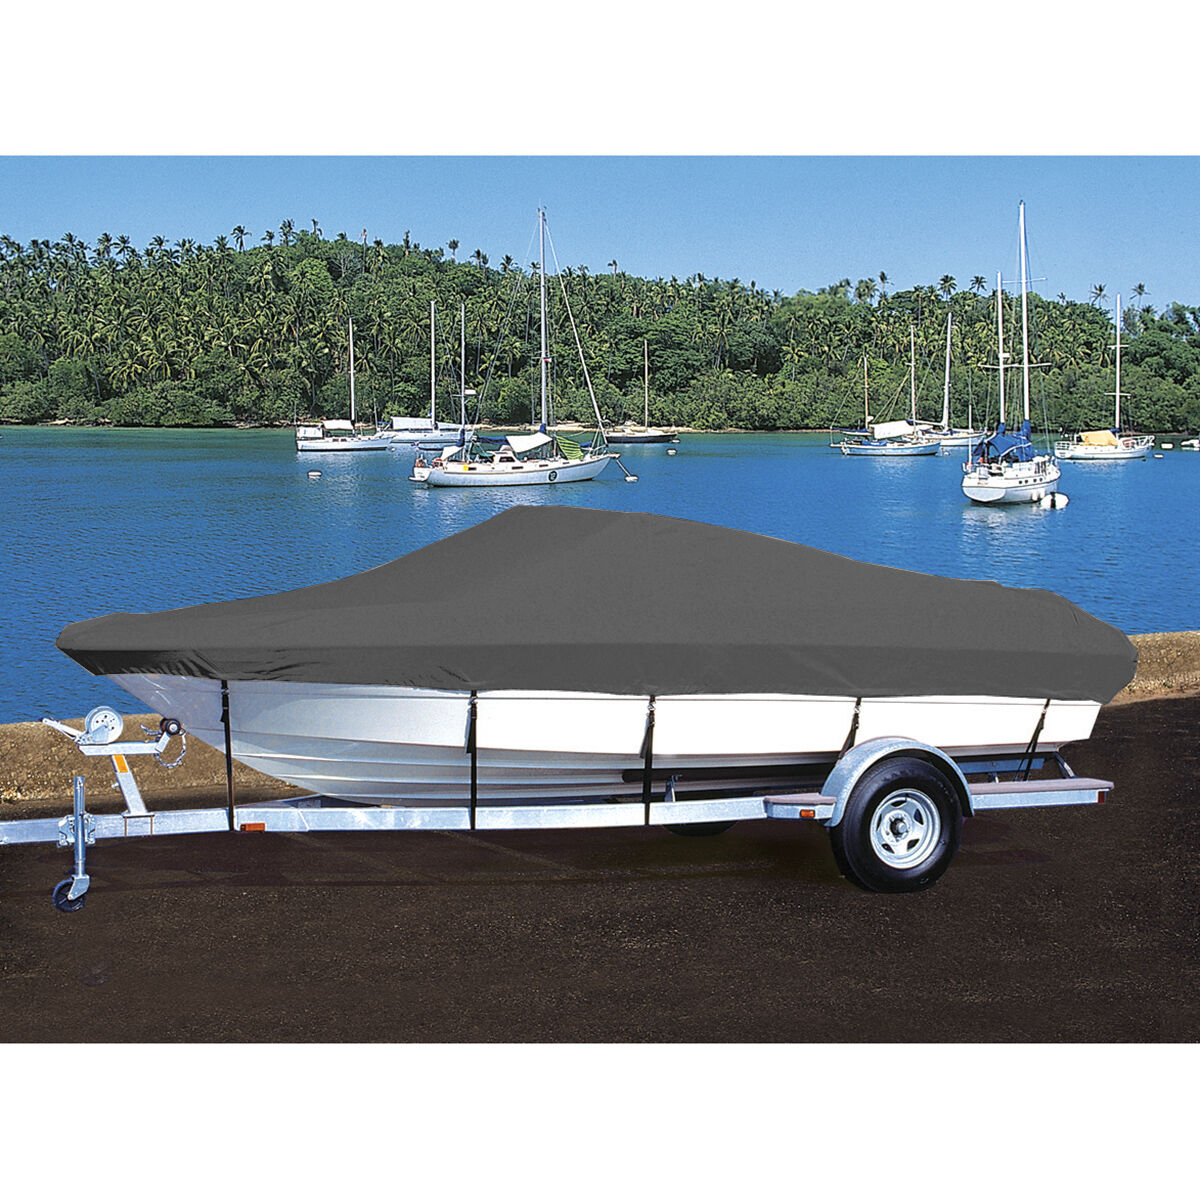 Taylor Made Trailerite Hot Shot Cover for 1995 Mastercraft 210 Maristar VRS Swm Boat Cover in Grey Polyester